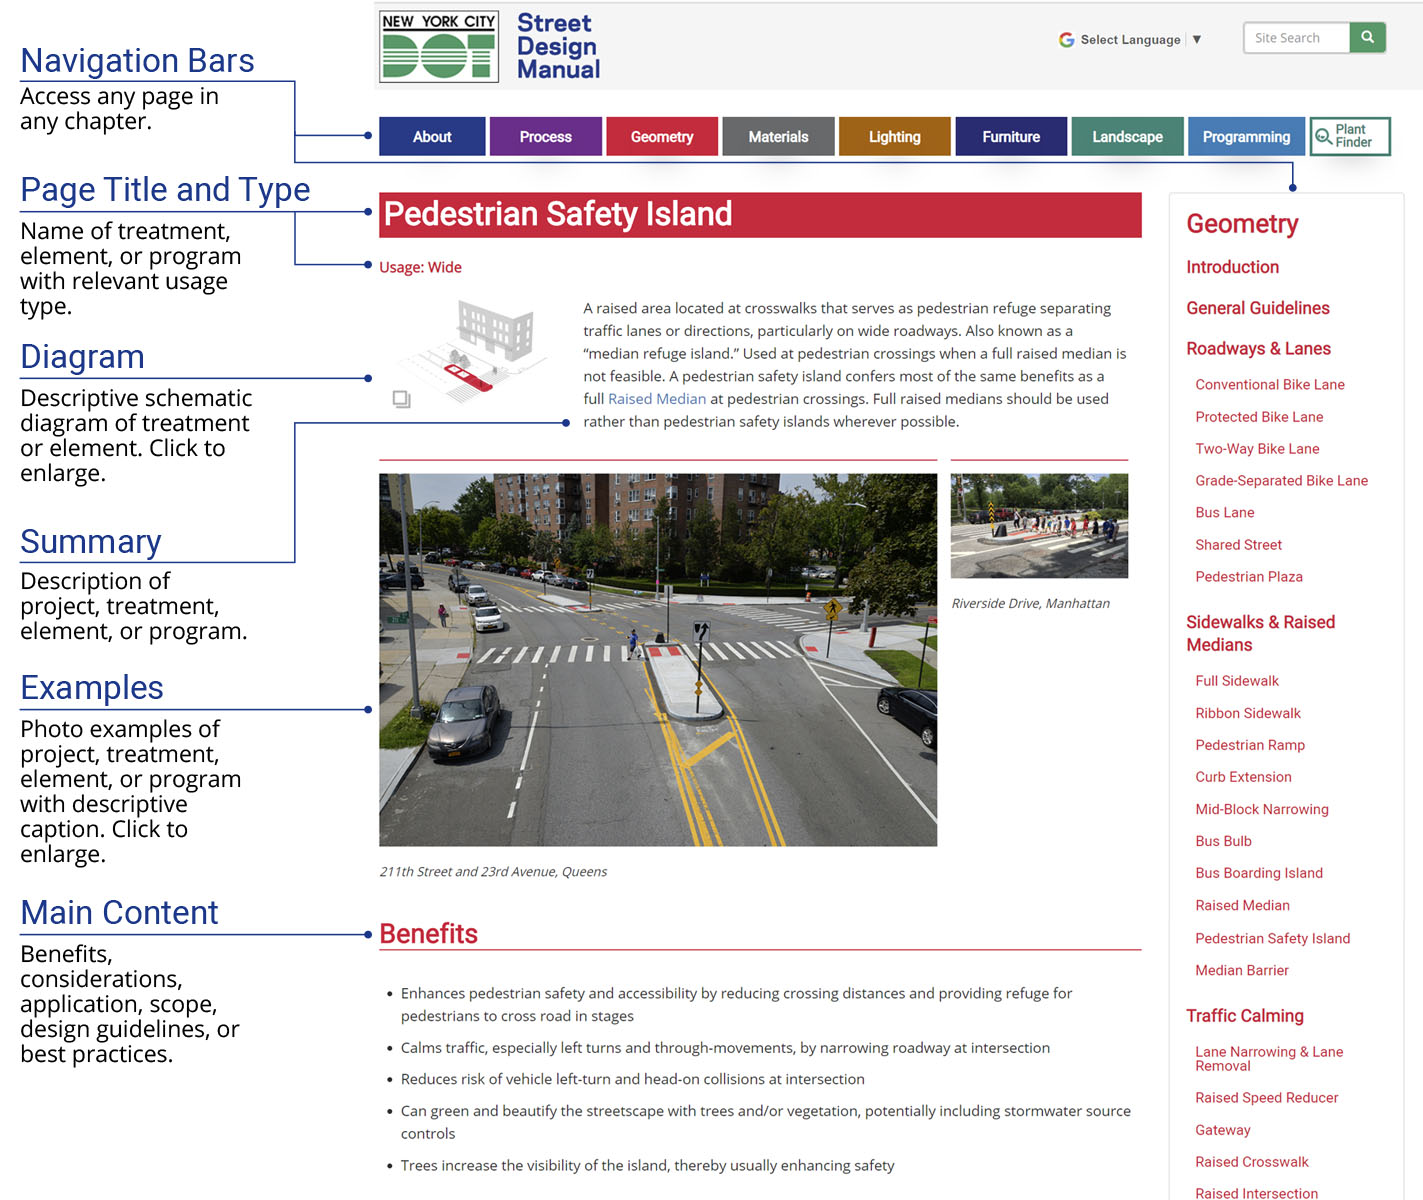 https://www.nycstreetdesign.info/sites/default/files/inline-images/Ped-Safety-Island-page.jpg